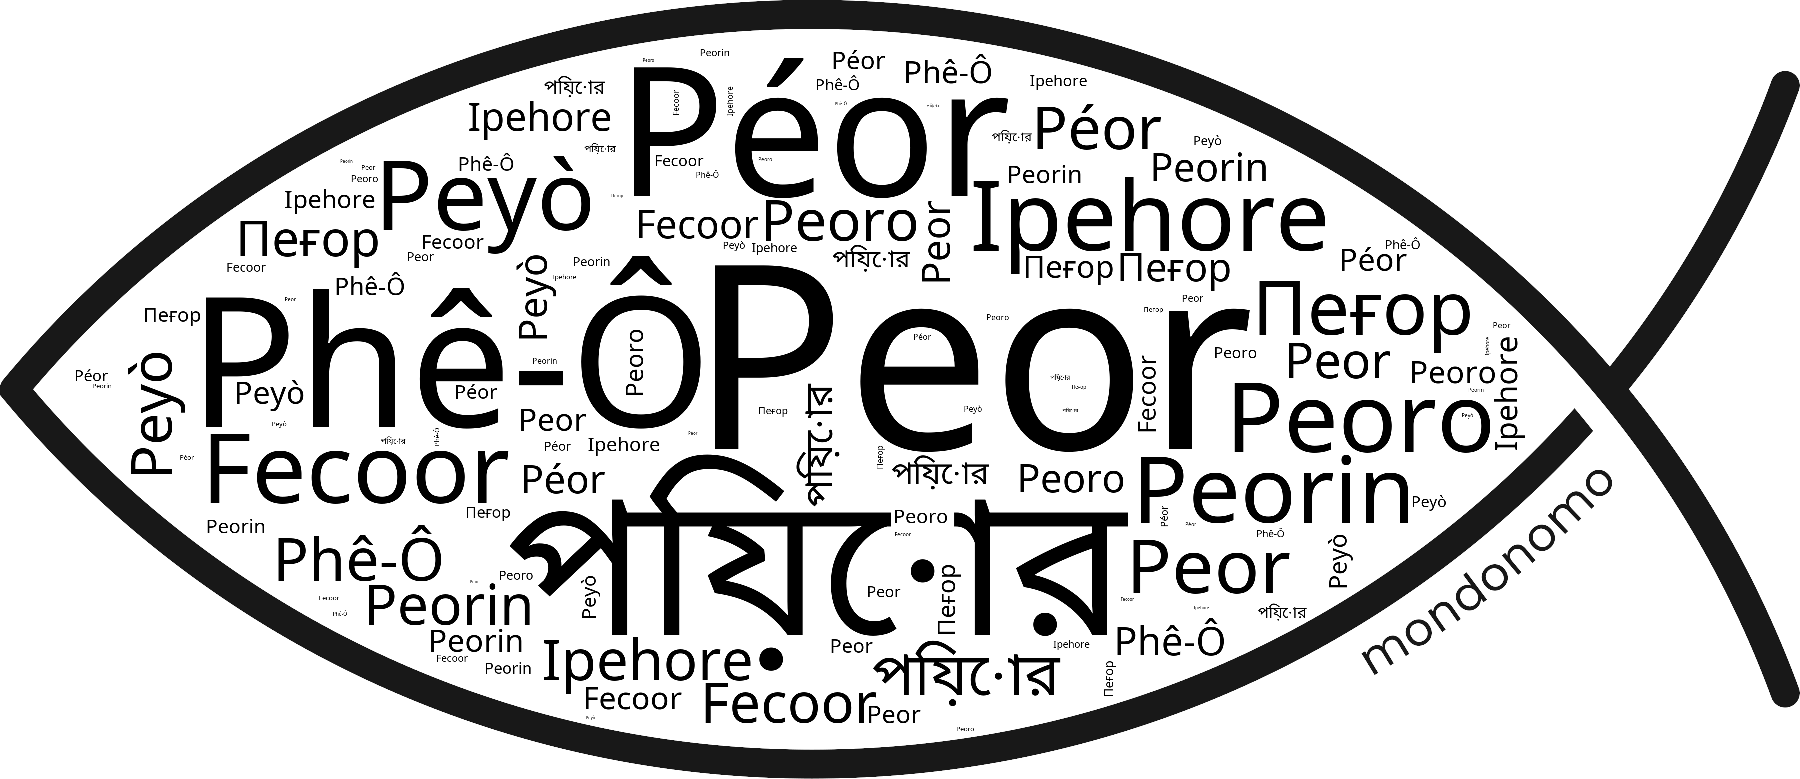 Name Peor in the world's Bibles